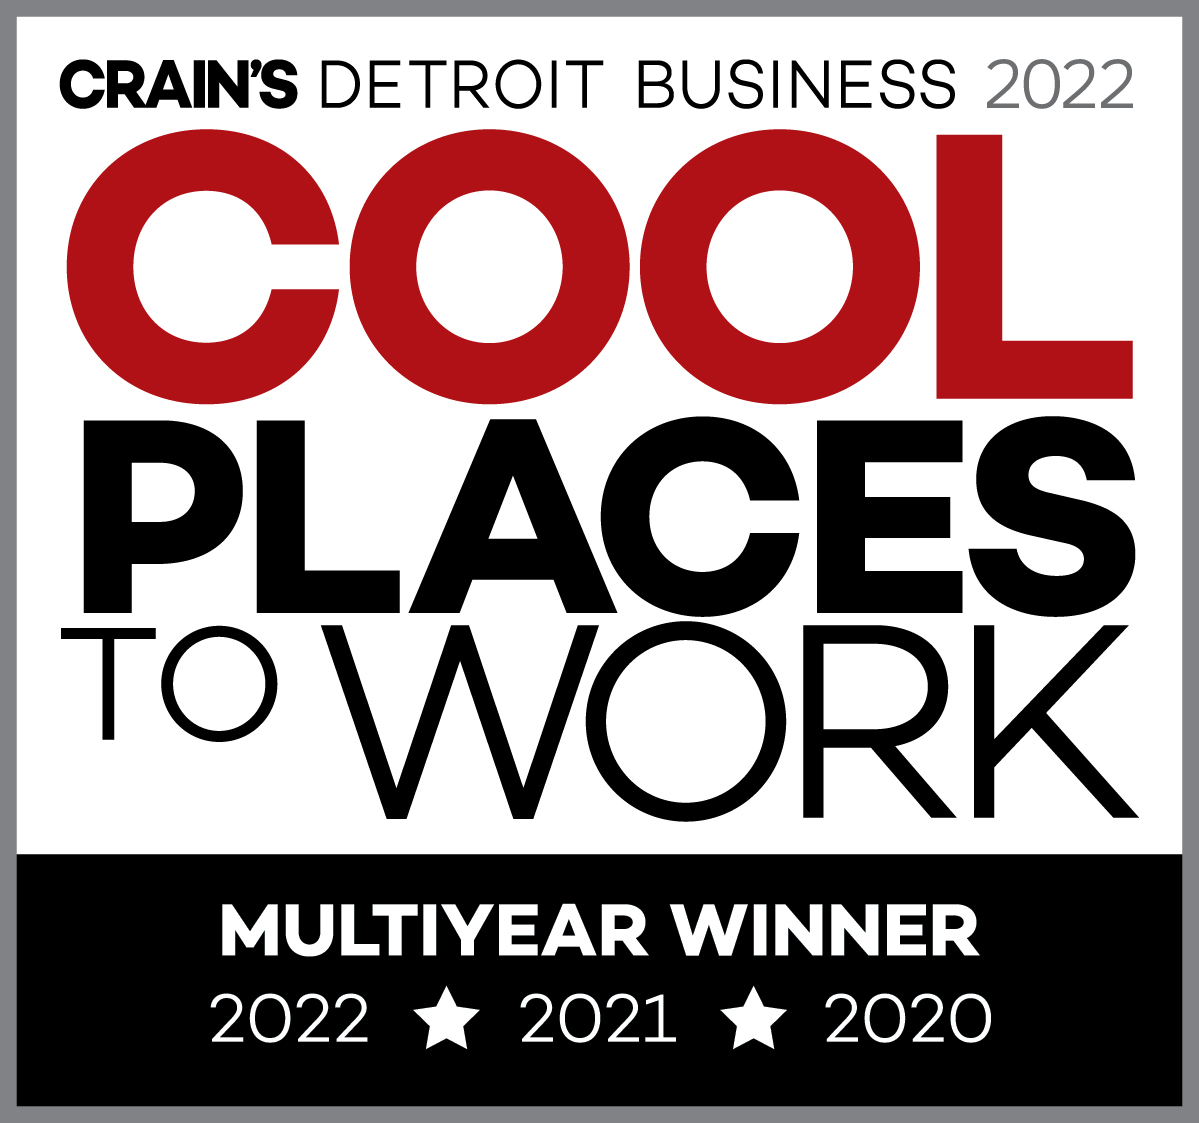 2022 Crain's Detroit Business logo Cool places to work